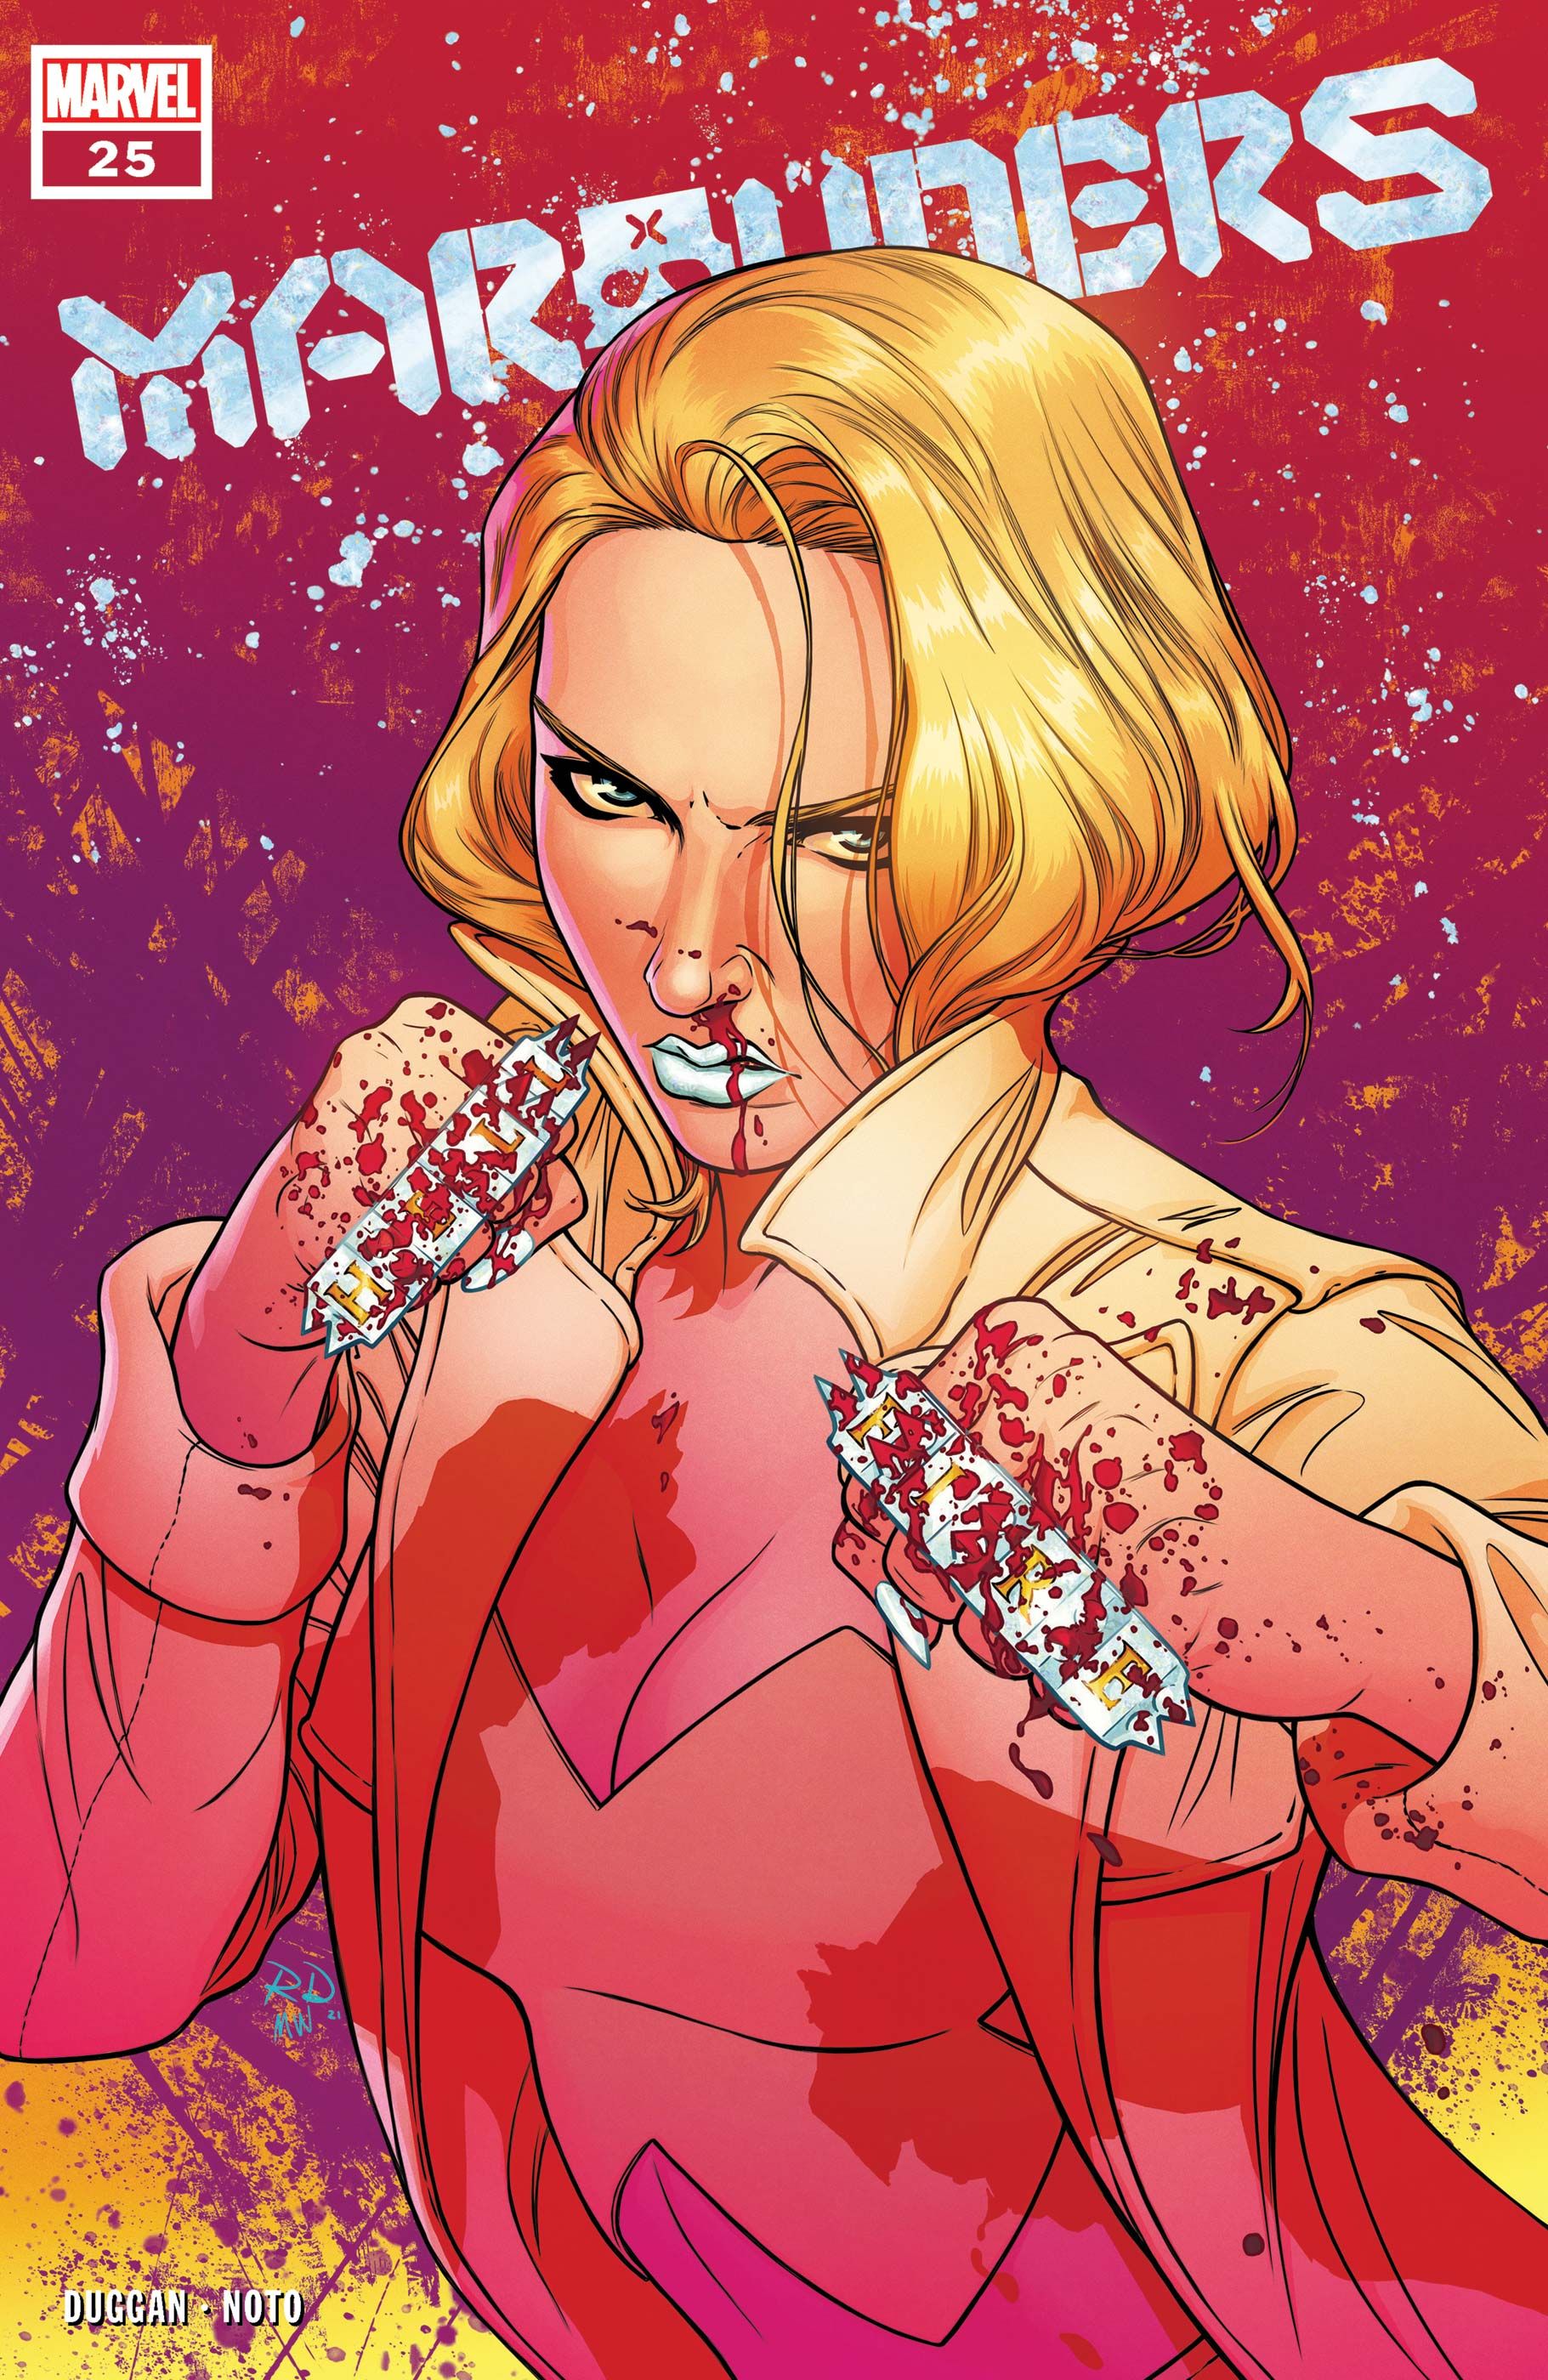 cover to Marauders vol 1 #25 by Russell Dauterman and Matthew Wilson, featuring Emma Frost